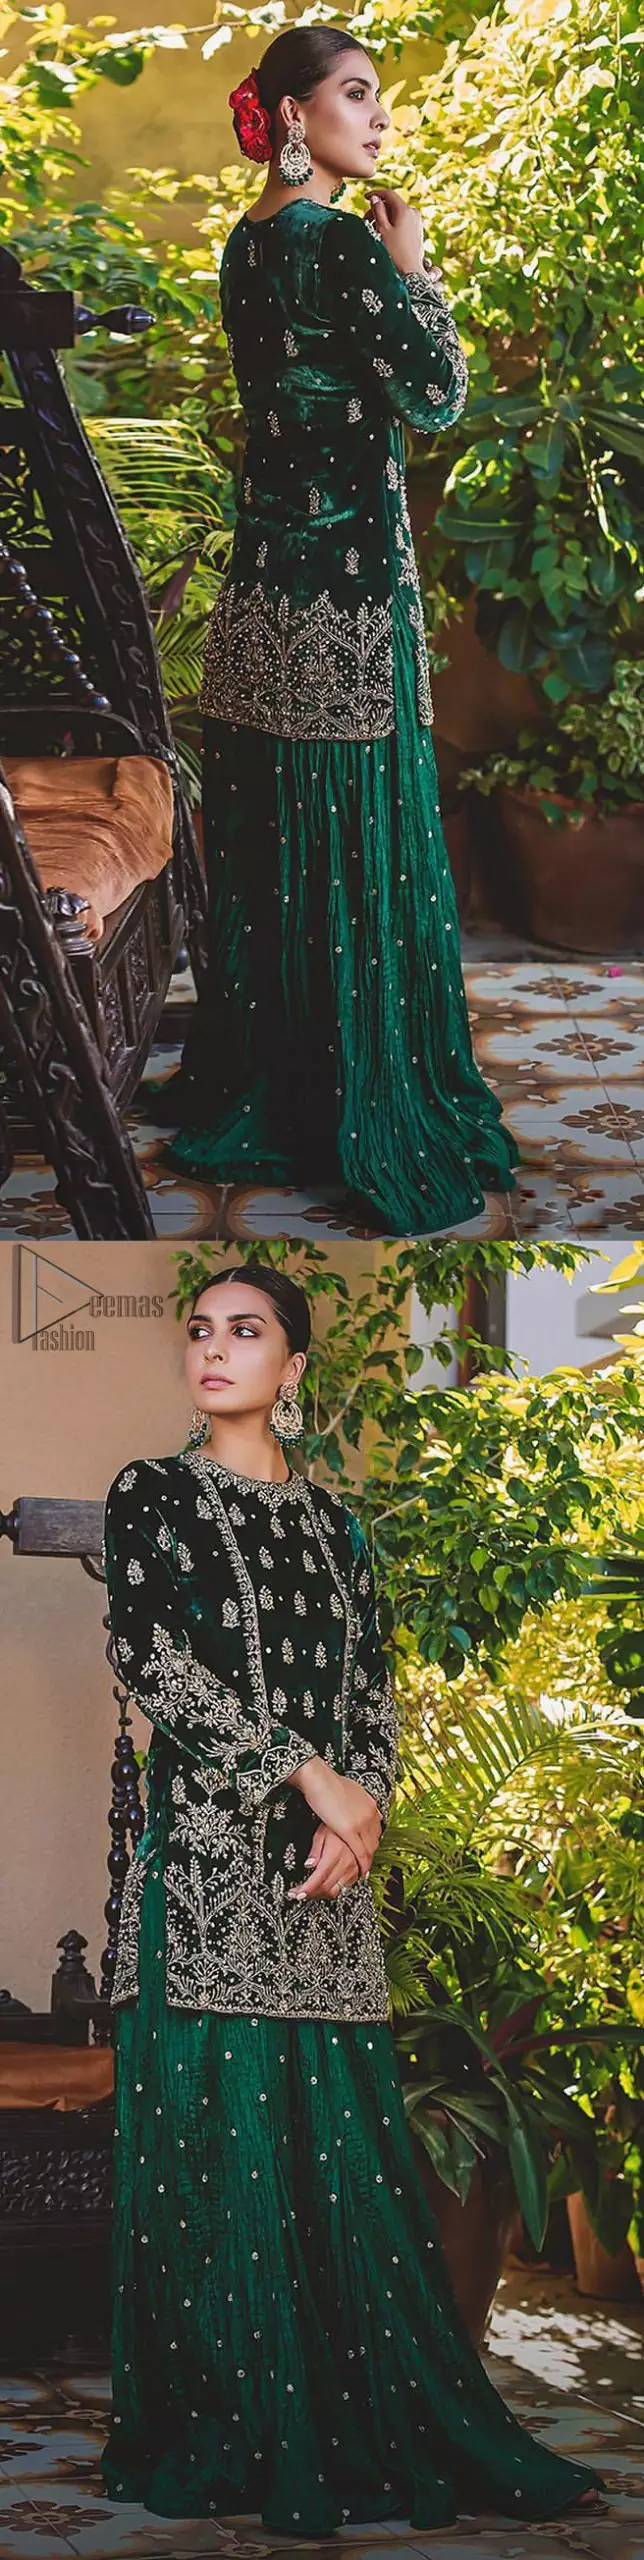 This mehndi outfit is a true example of decorative and ornamental expression stylized in a contemporary way. The dress comes with a bottle green velvet shirt with beautiful embellished motifs on the ground and vertically worked lines and it finished with a thick embellished border with silver zardozi work. Pair it up with bottle green crushed sharara adorned with scattered sequins all over. To complete the look, go with chiffon dupatta decorated with sequins spray all over.